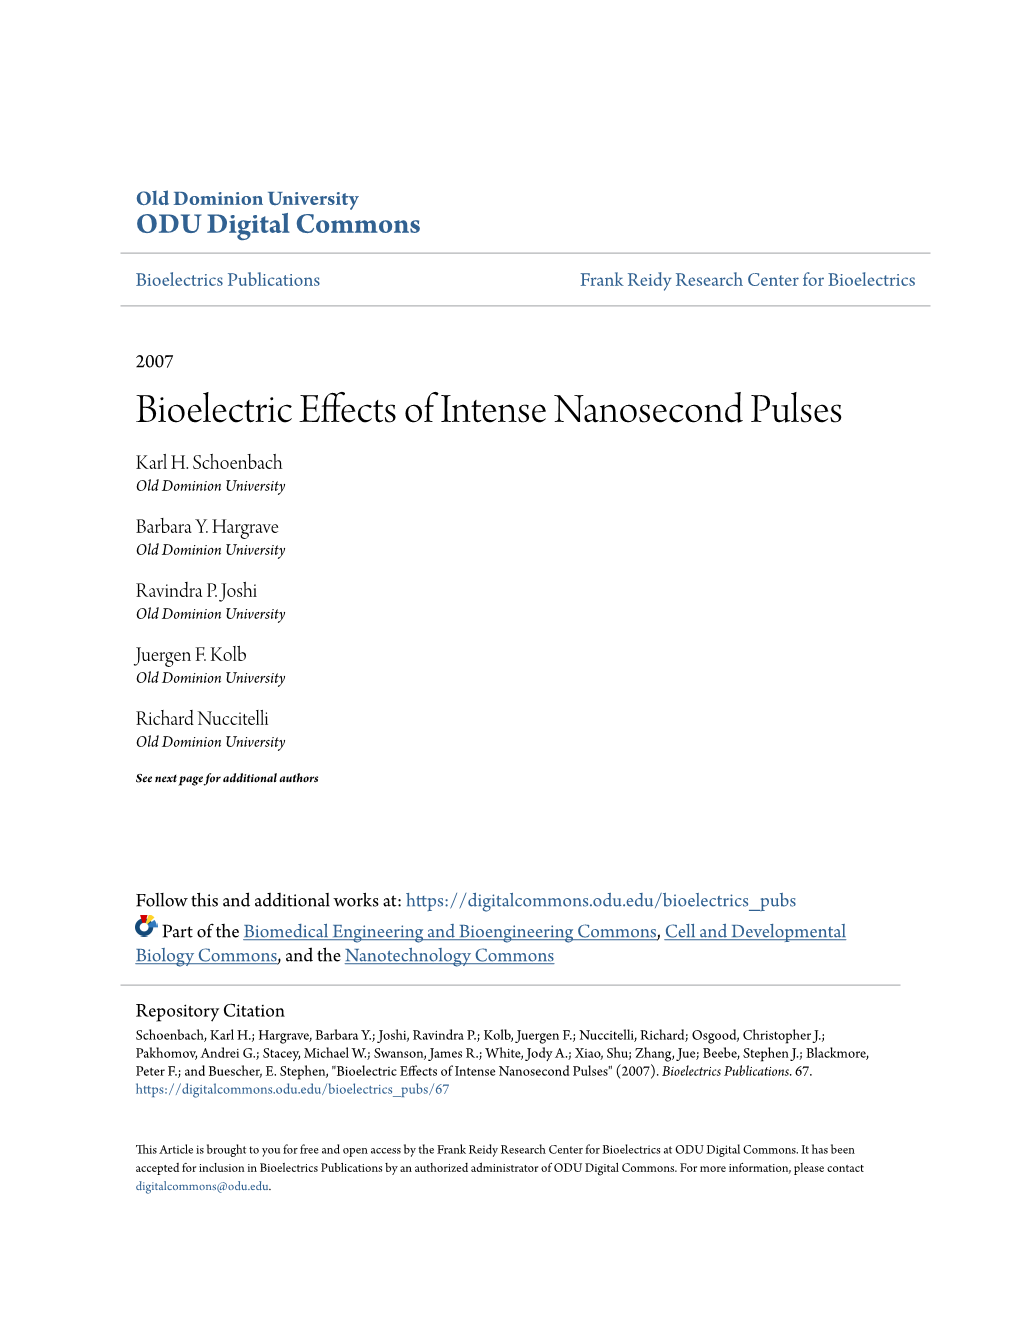 Bioelectric Effects of Intense Nanosecond Pulses Karl H